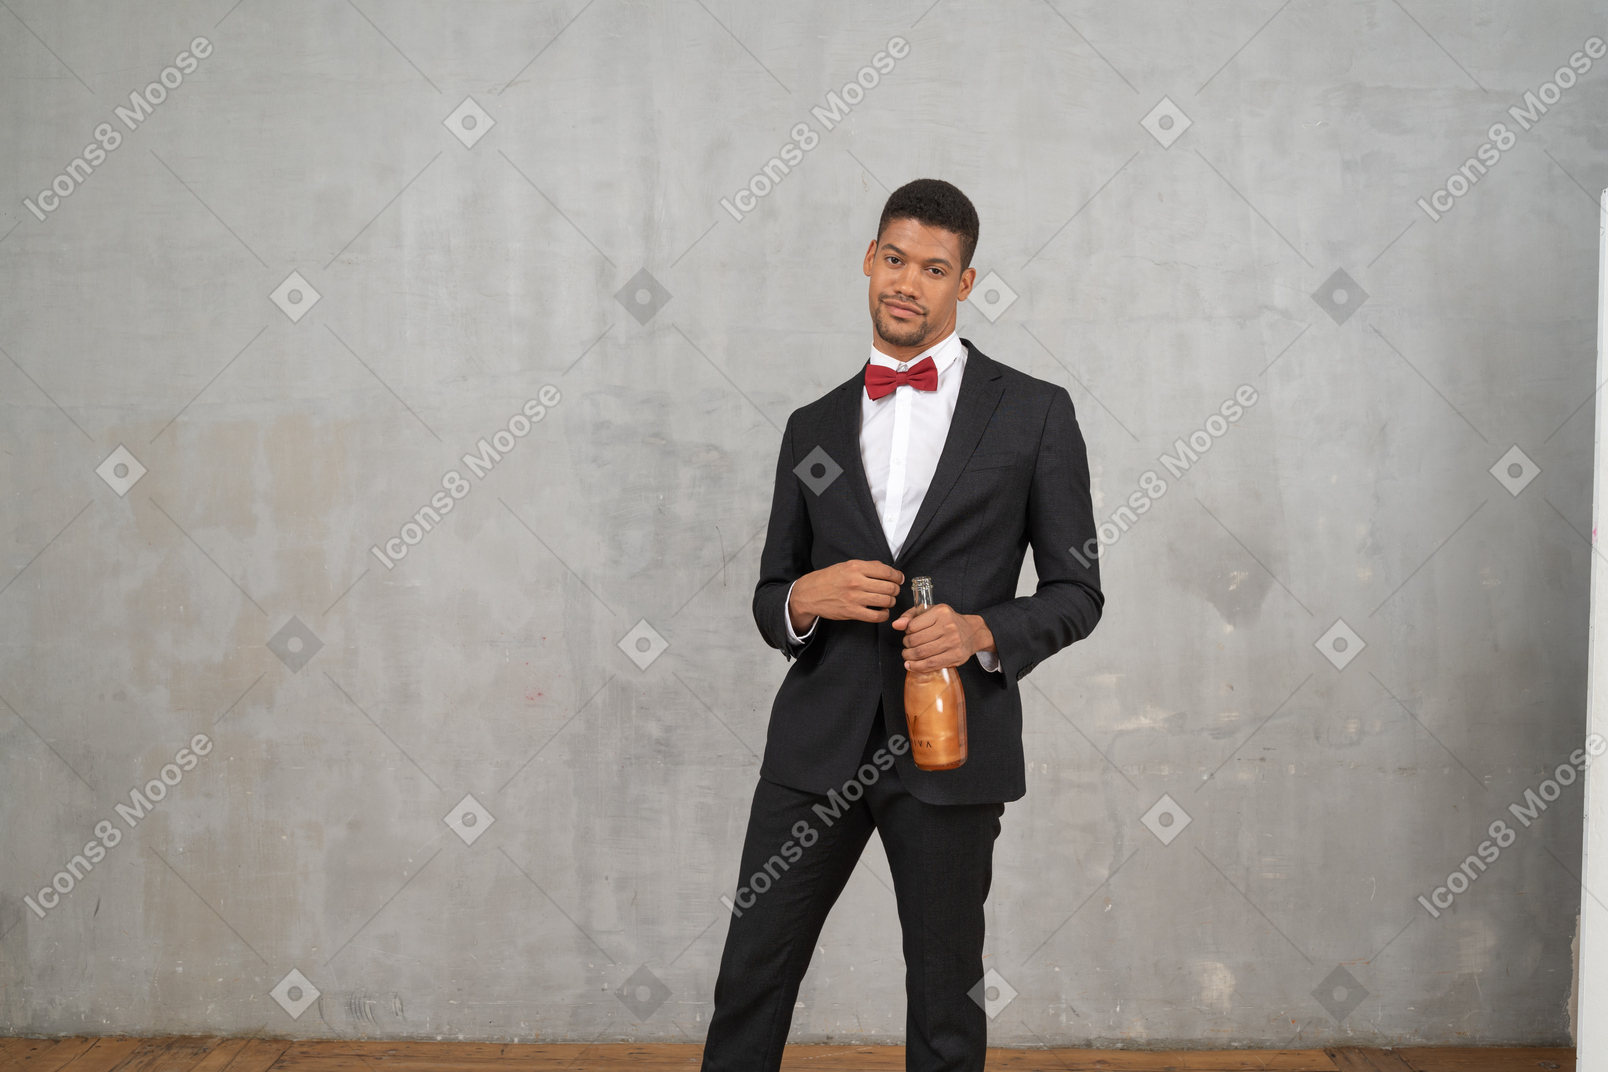 Man holding a champagne bottle and looking at camera